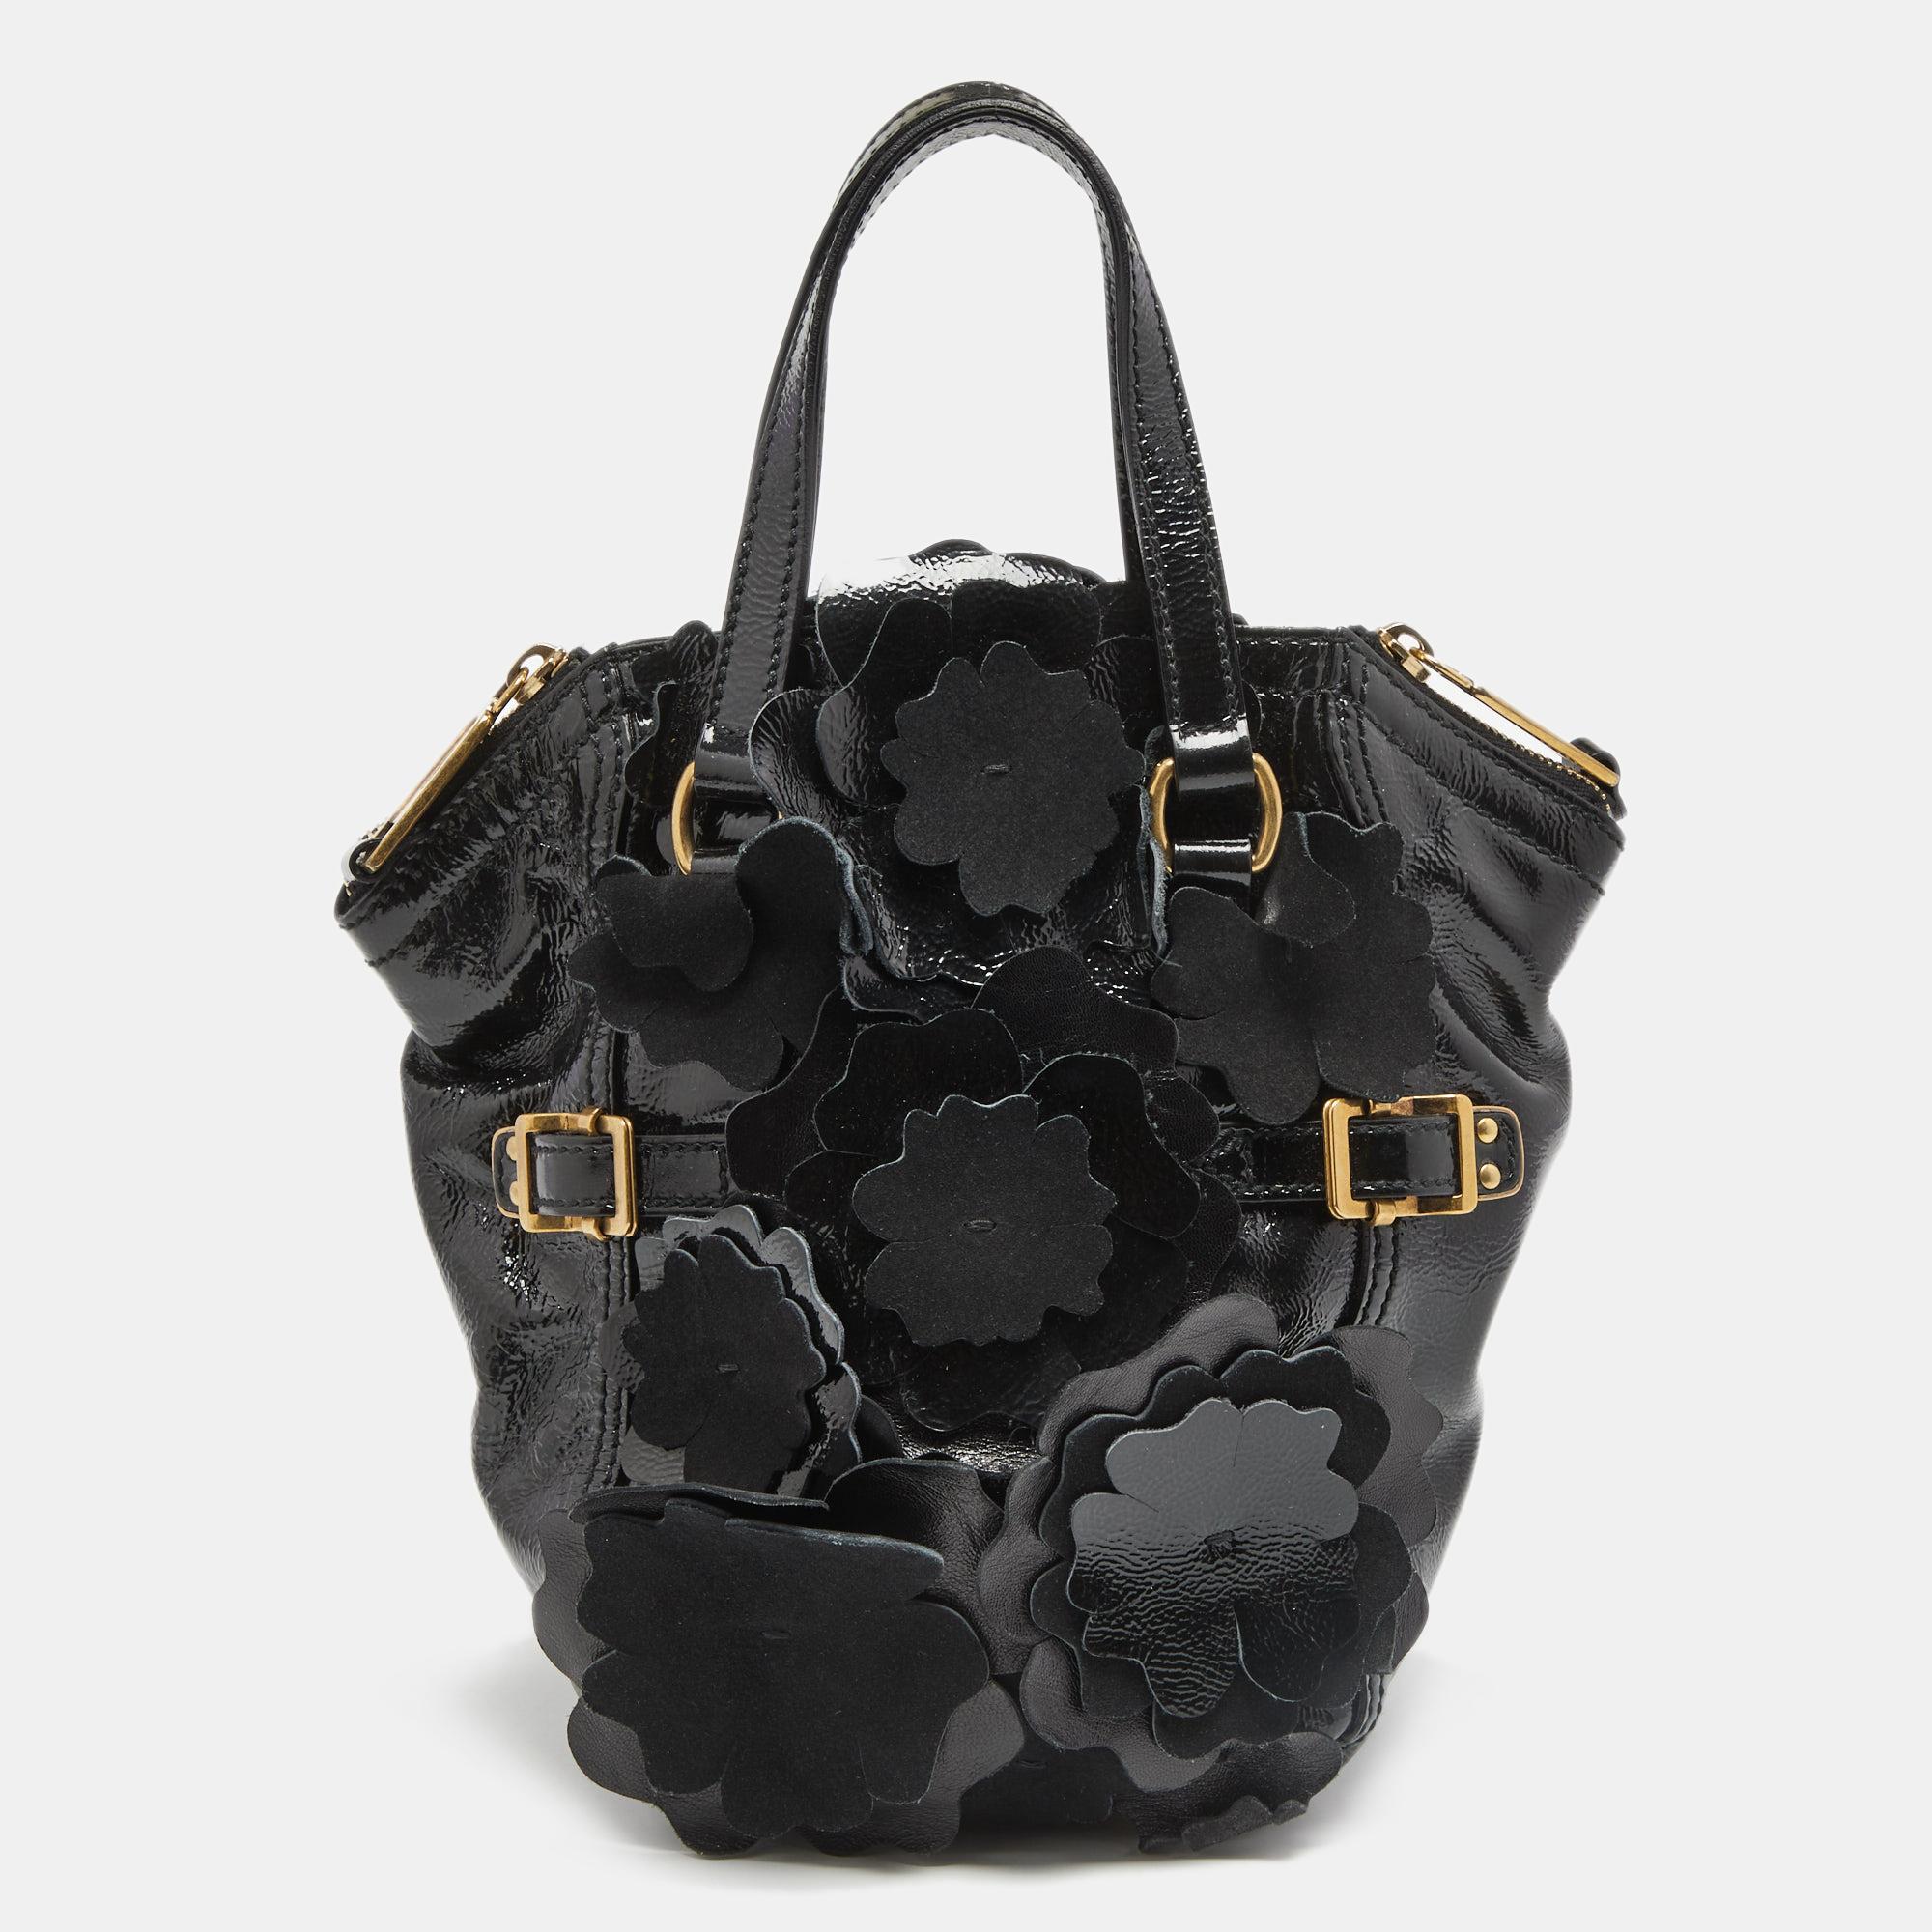 Every woman needs a bag that is pretty and functional, just like this Downtown tote from Yves Saint Laurent. Crafted with precision using patent leather, the bag has been styled with cute floral appliques and buckles. It also features two handles